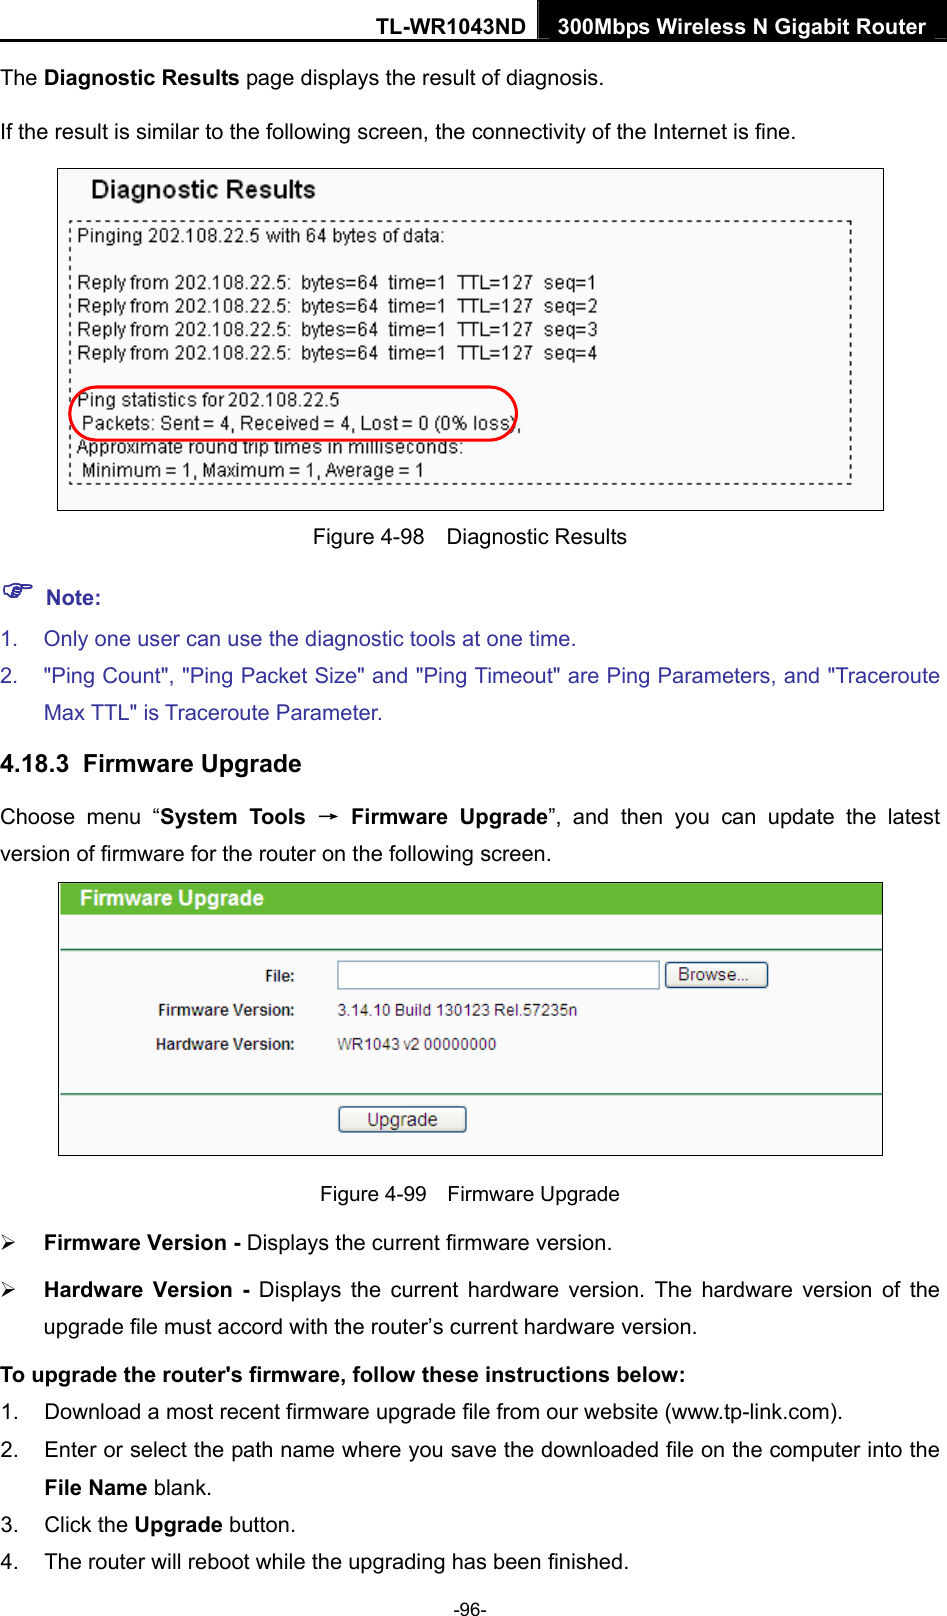 TL-WR1043ND 300Mbps Wireless N Gigabit Router  The Diagnostic Results page displays the result of diagnosis. If the result is similar to the following screen, the connectivity of the Internet is fine.  Figure 4-98  Diagnostic Results ) Note: 1.  Only one user can use the diagnostic tools at one time.   2.  &quot;Ping Count&quot;, &quot;Ping Packet Size&quot; and &quot;Ping Timeout&quot; are Ping Parameters, and &quot;Traceroute Max TTL&quot; is Traceroute Parameter.   4.18.3  Firmware Upgrade Choose menu “System Tools → Firmware Upgrade”, and then you can update the latest version of firmware for the router on the following screen.  Figure 4-99  Firmware Upgrade ¾ Firmware Version - Displays the current firmware version. ¾ Hardware Version - Displays the current hardware version. The hardware version of the upgrade file must accord with the router’s current hardware version. To upgrade the router&apos;s firmware, follow these instructions below: 1.  Download a most recent firmware upgrade file from our website (www.tp-link.com).   2.  Enter or select the path name where you save the downloaded file on the computer into the File Name blank.   3. Click the Upgrade button.   4.  The router will reboot while the upgrading has been finished.   -96- 